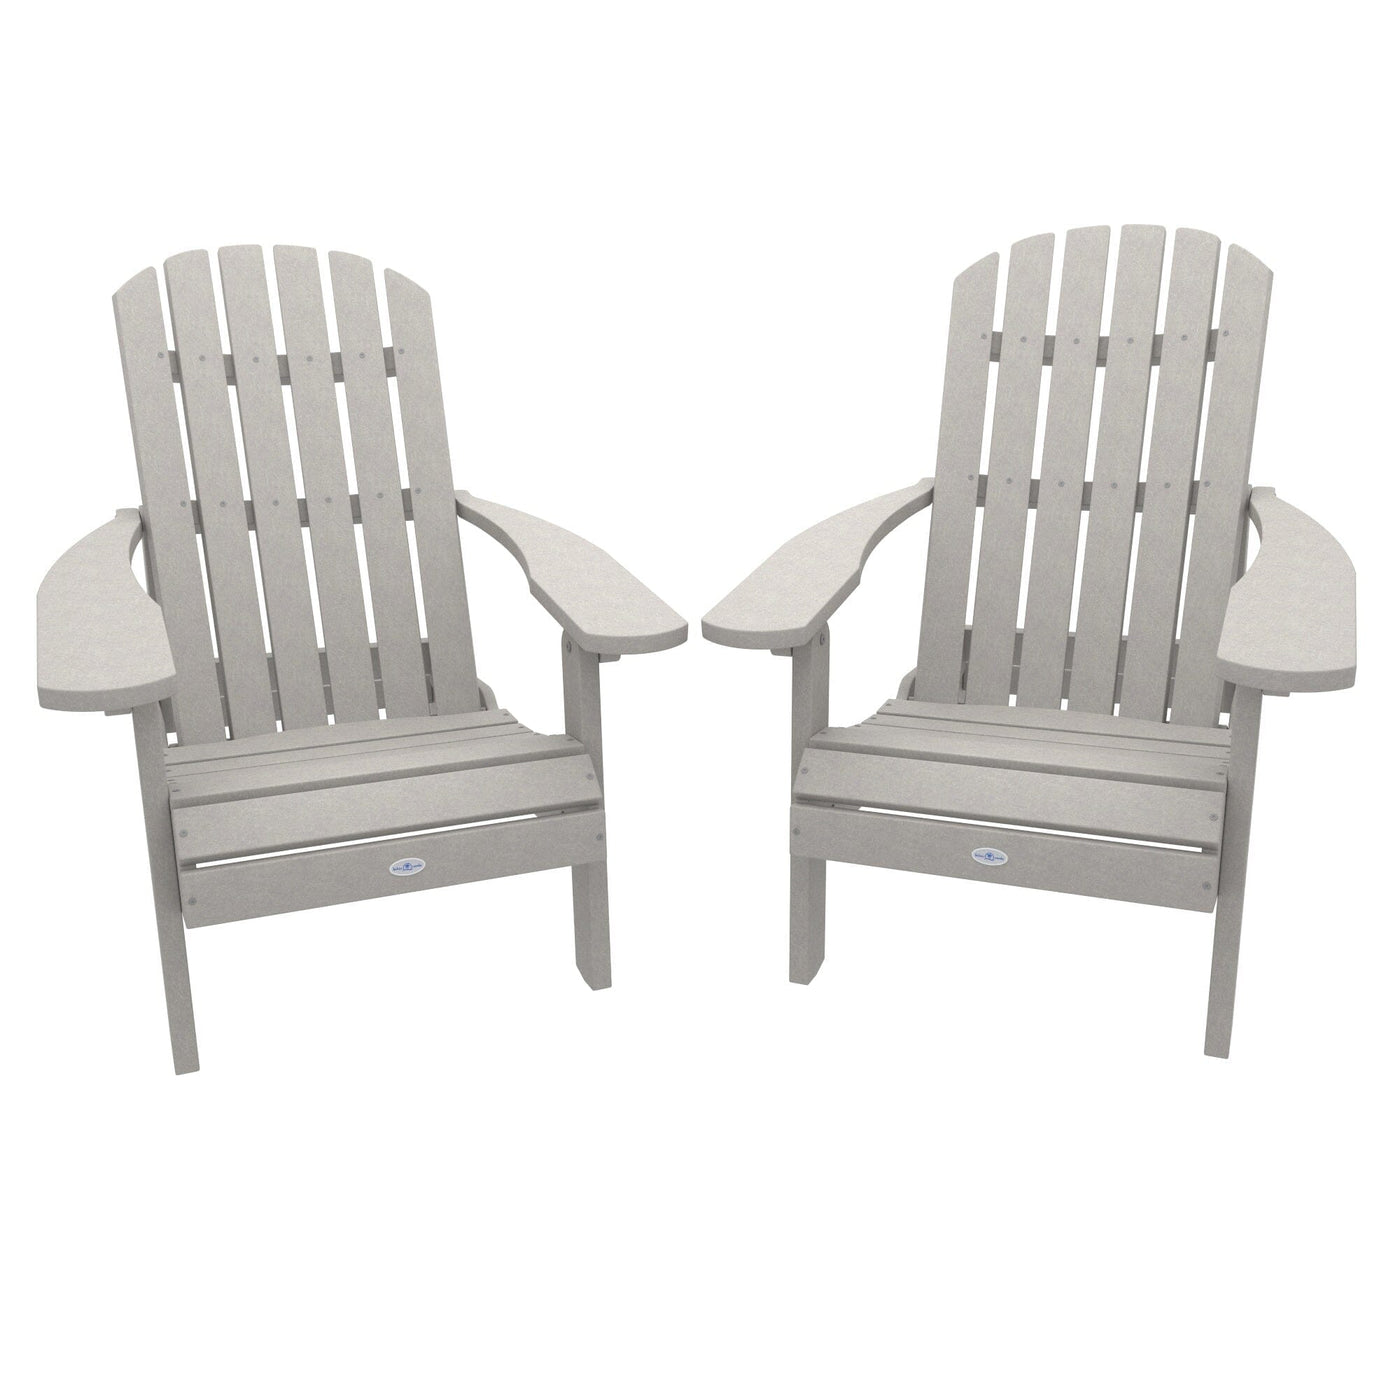 Cape Folding and Reclining Adirondack Chair (Set of 2) Kitted Set Bahia Verde Outdoors Cove Gray 